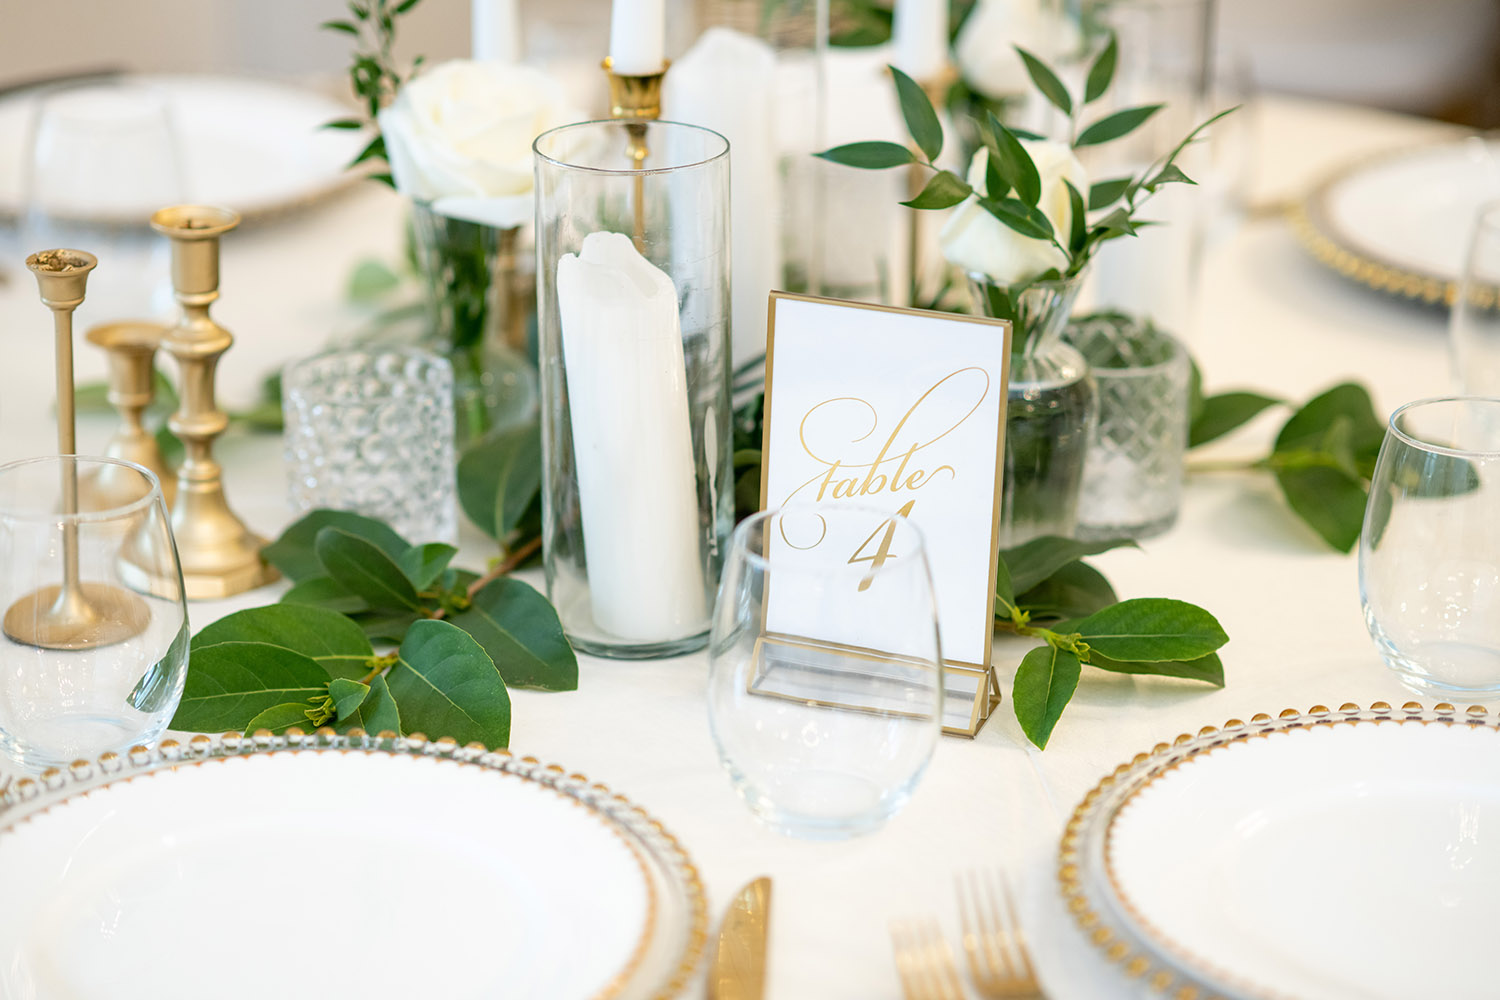 Close up of the table decoration.